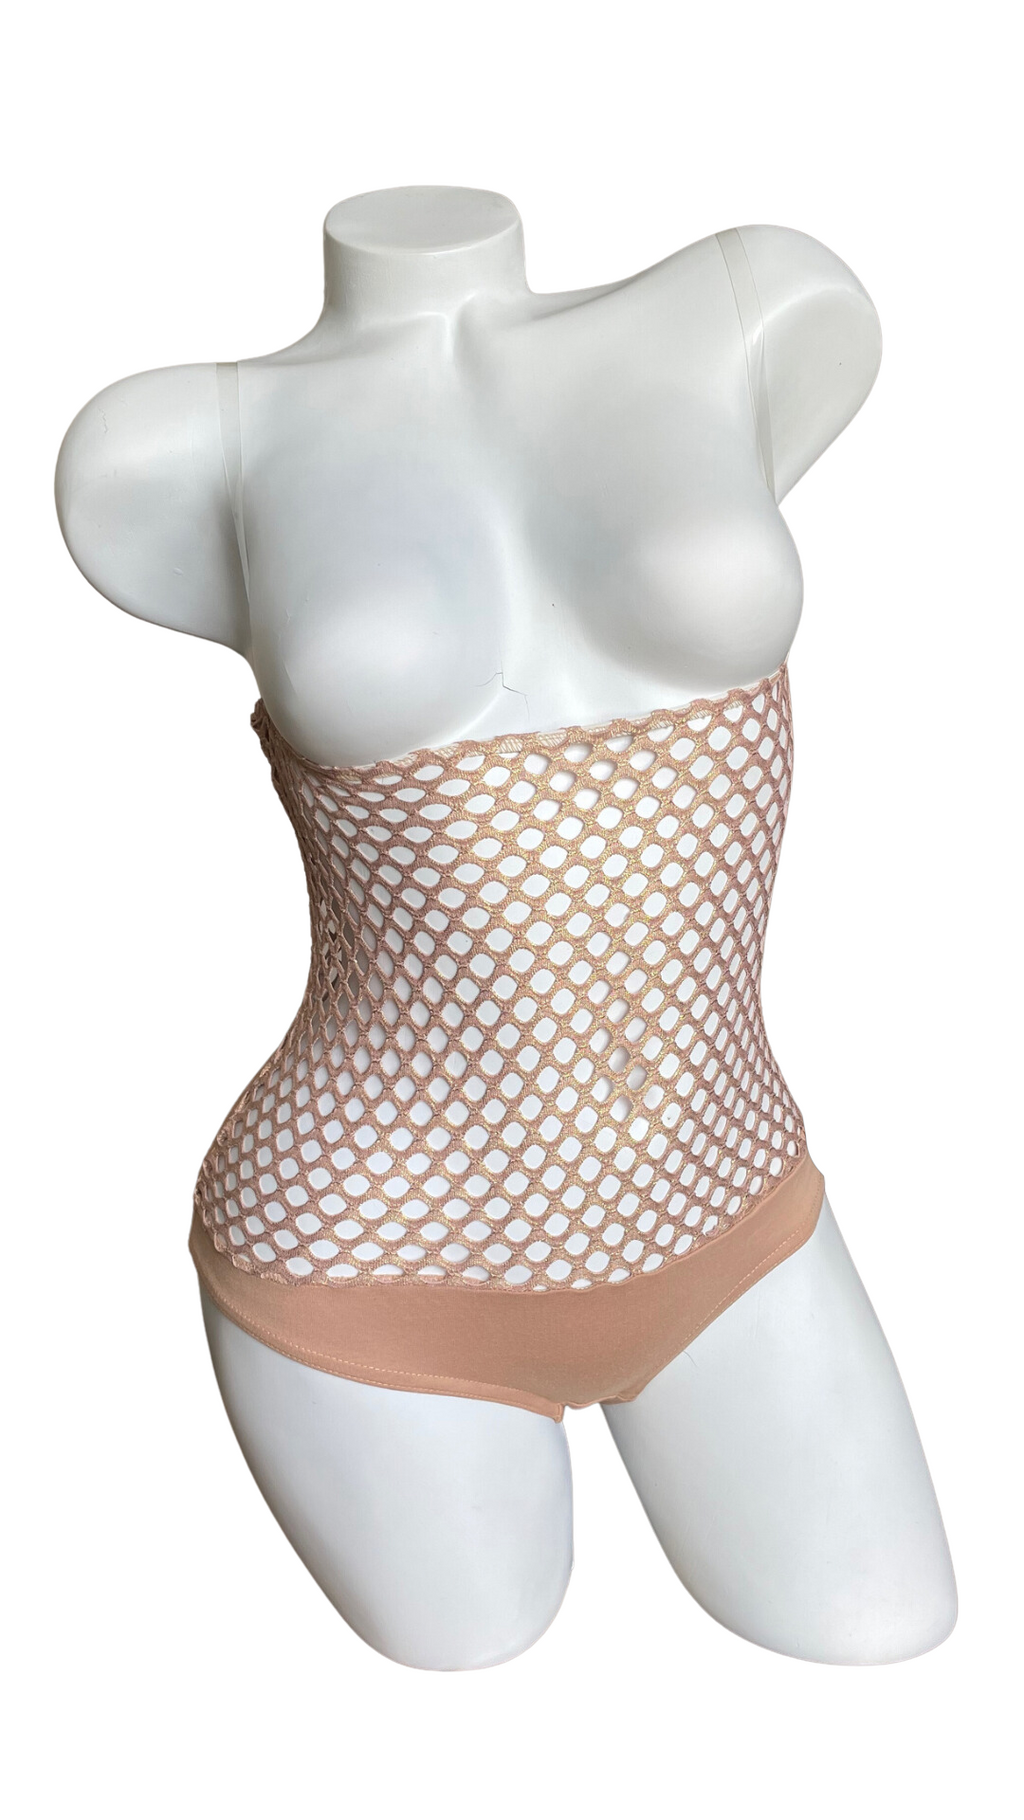 In Stock - Underbust with straps - Nude Gold Fishnet